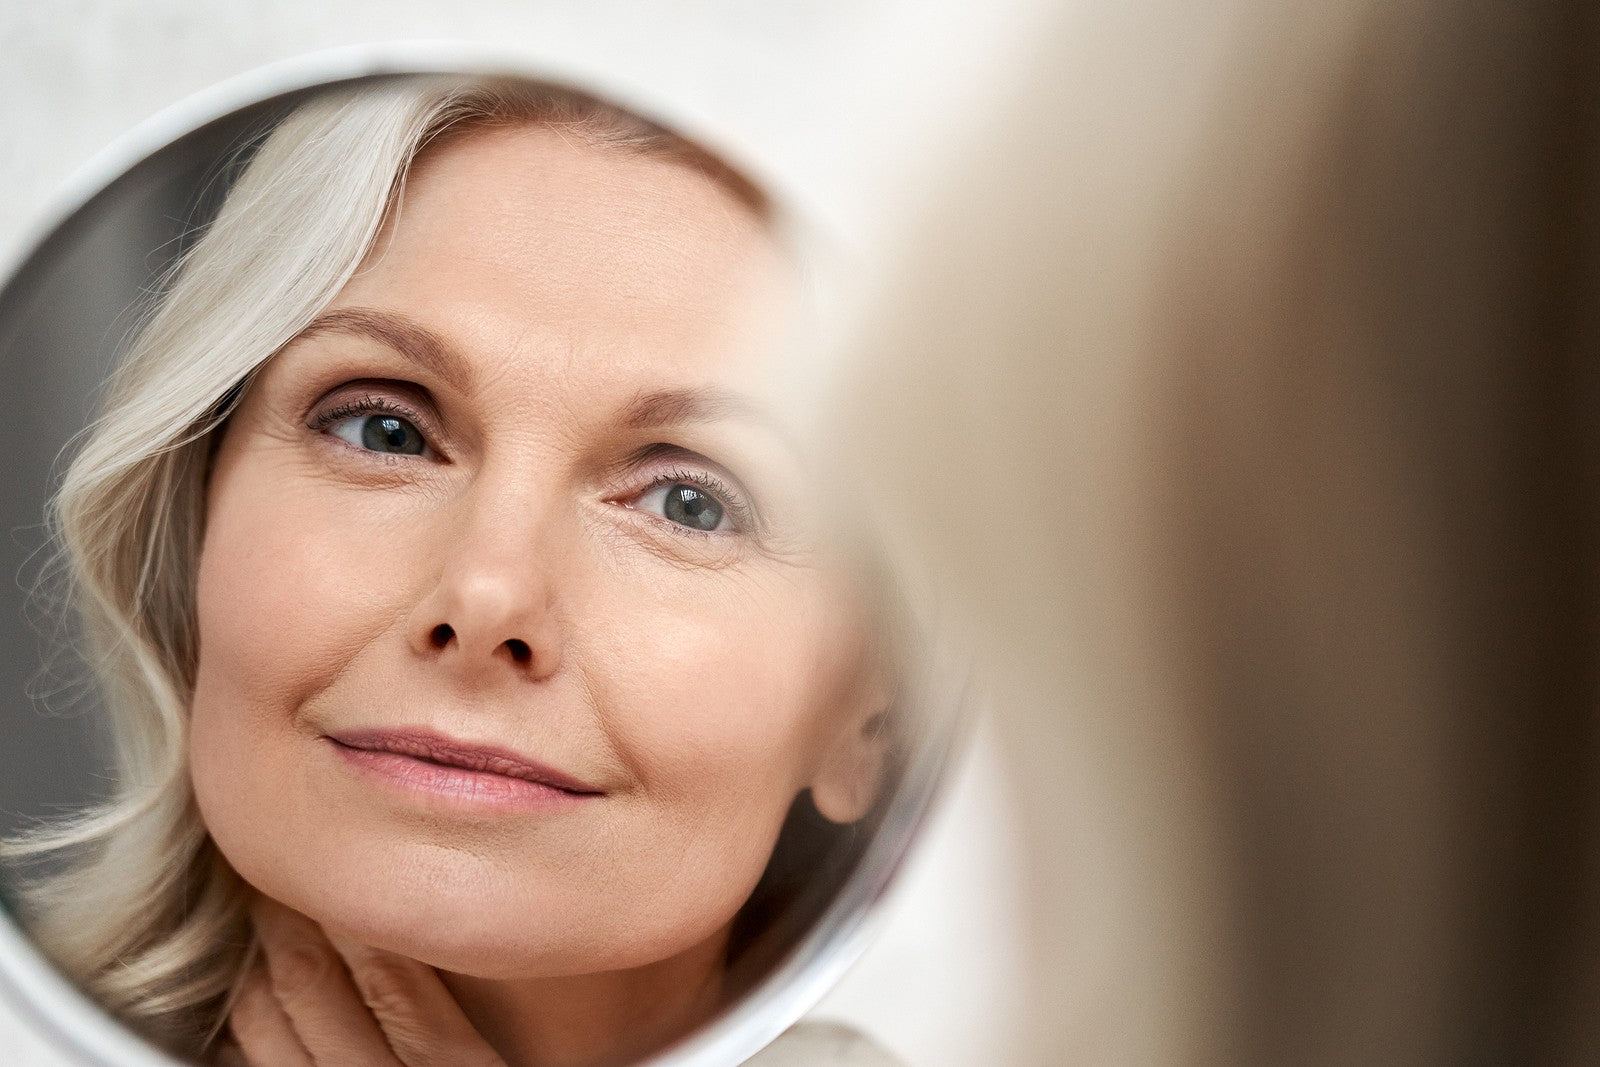 Older woman looking at her skin in the mirror - how to combat signs of aging